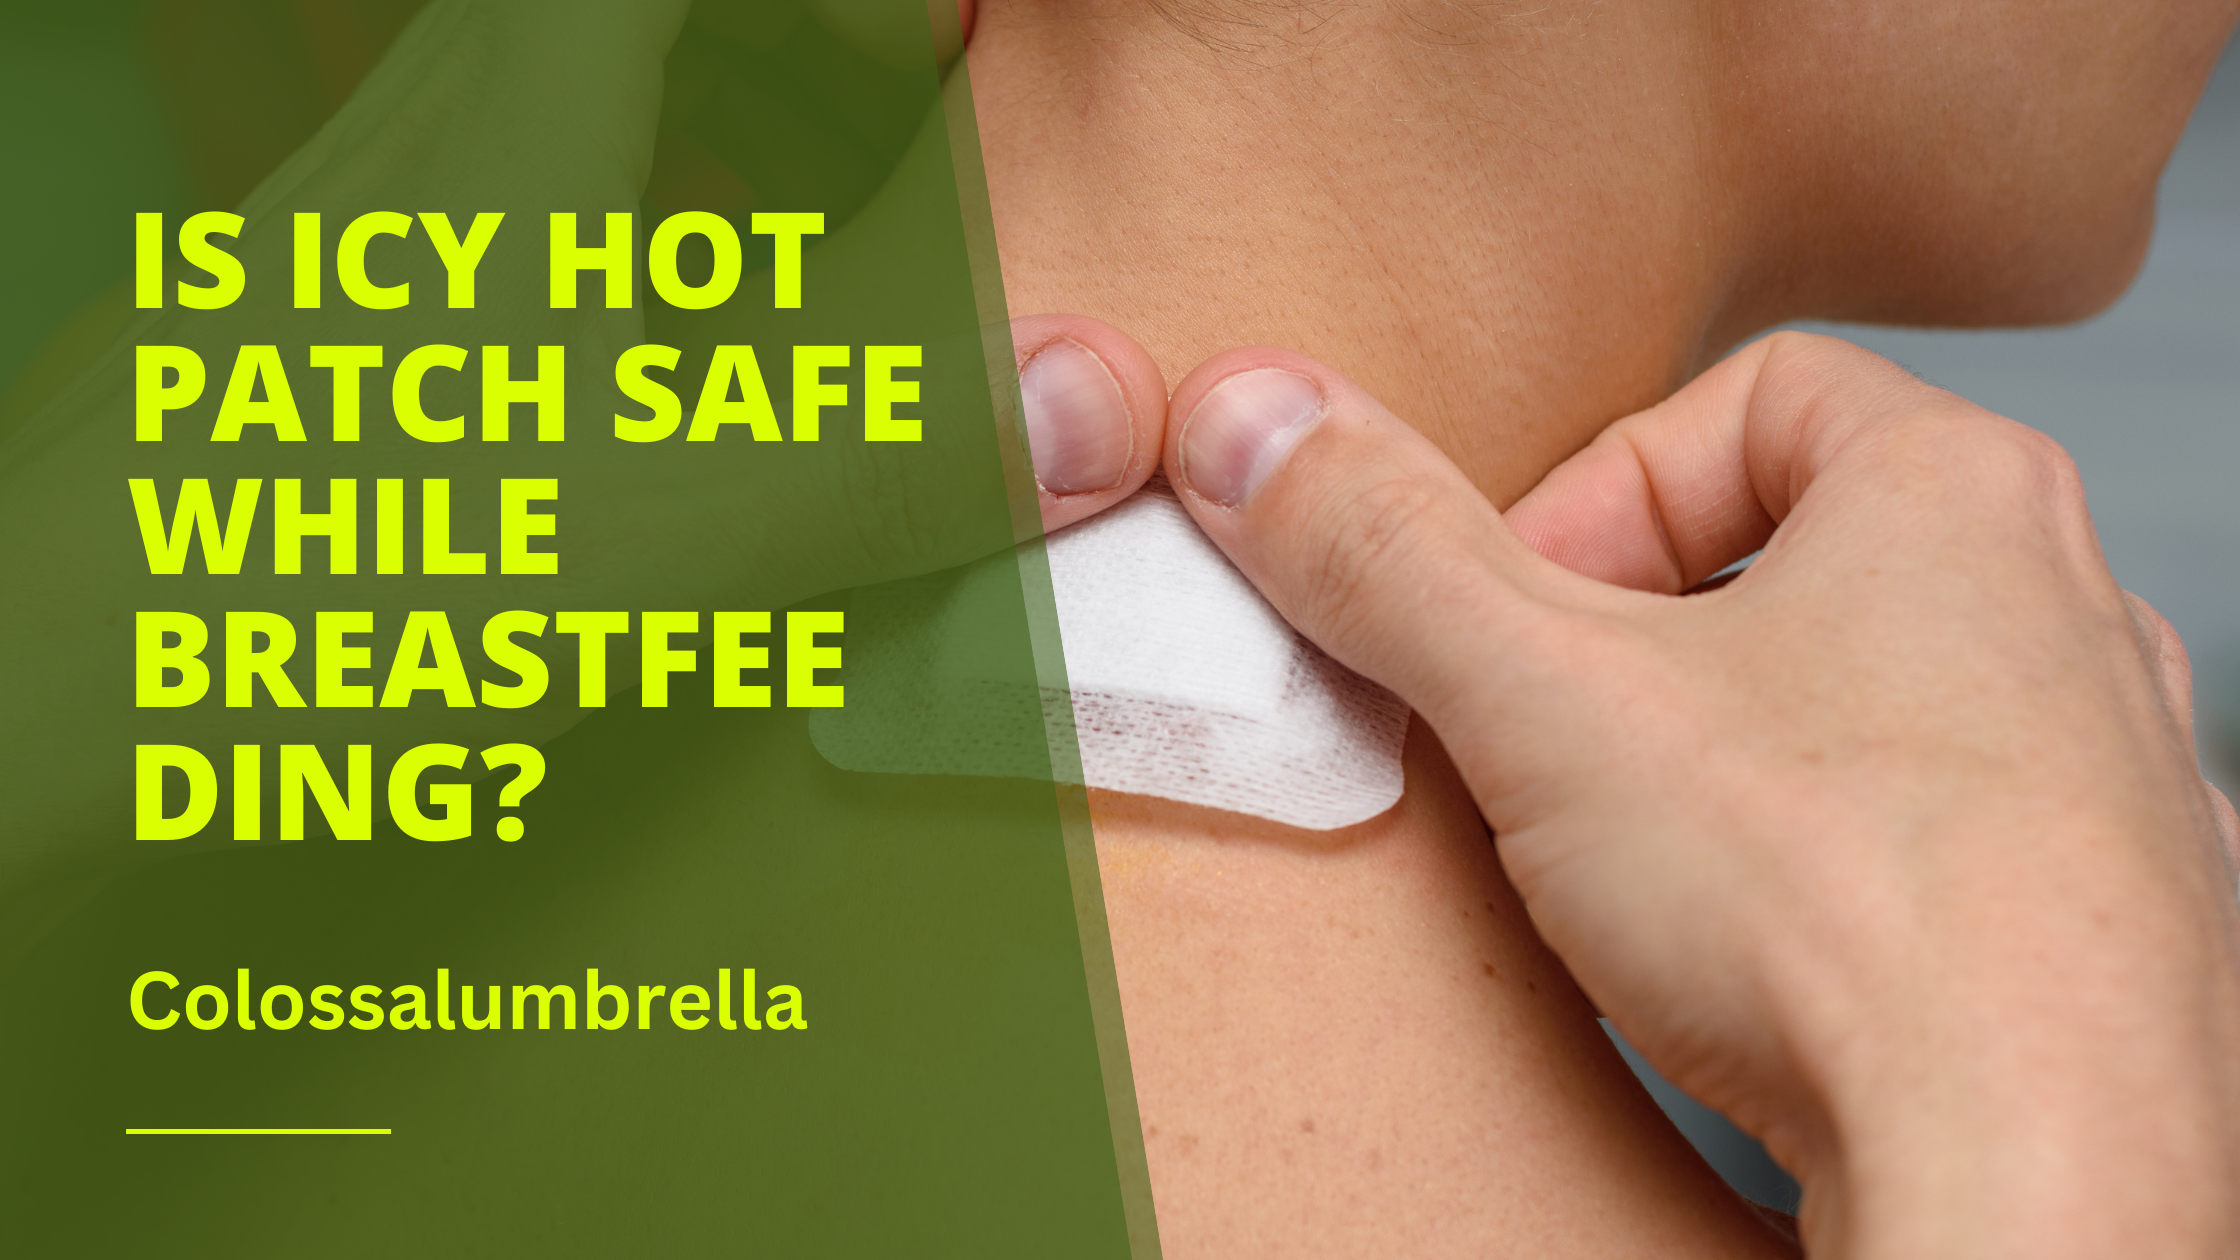 Is Icy hot patch safe while breastfeeding?